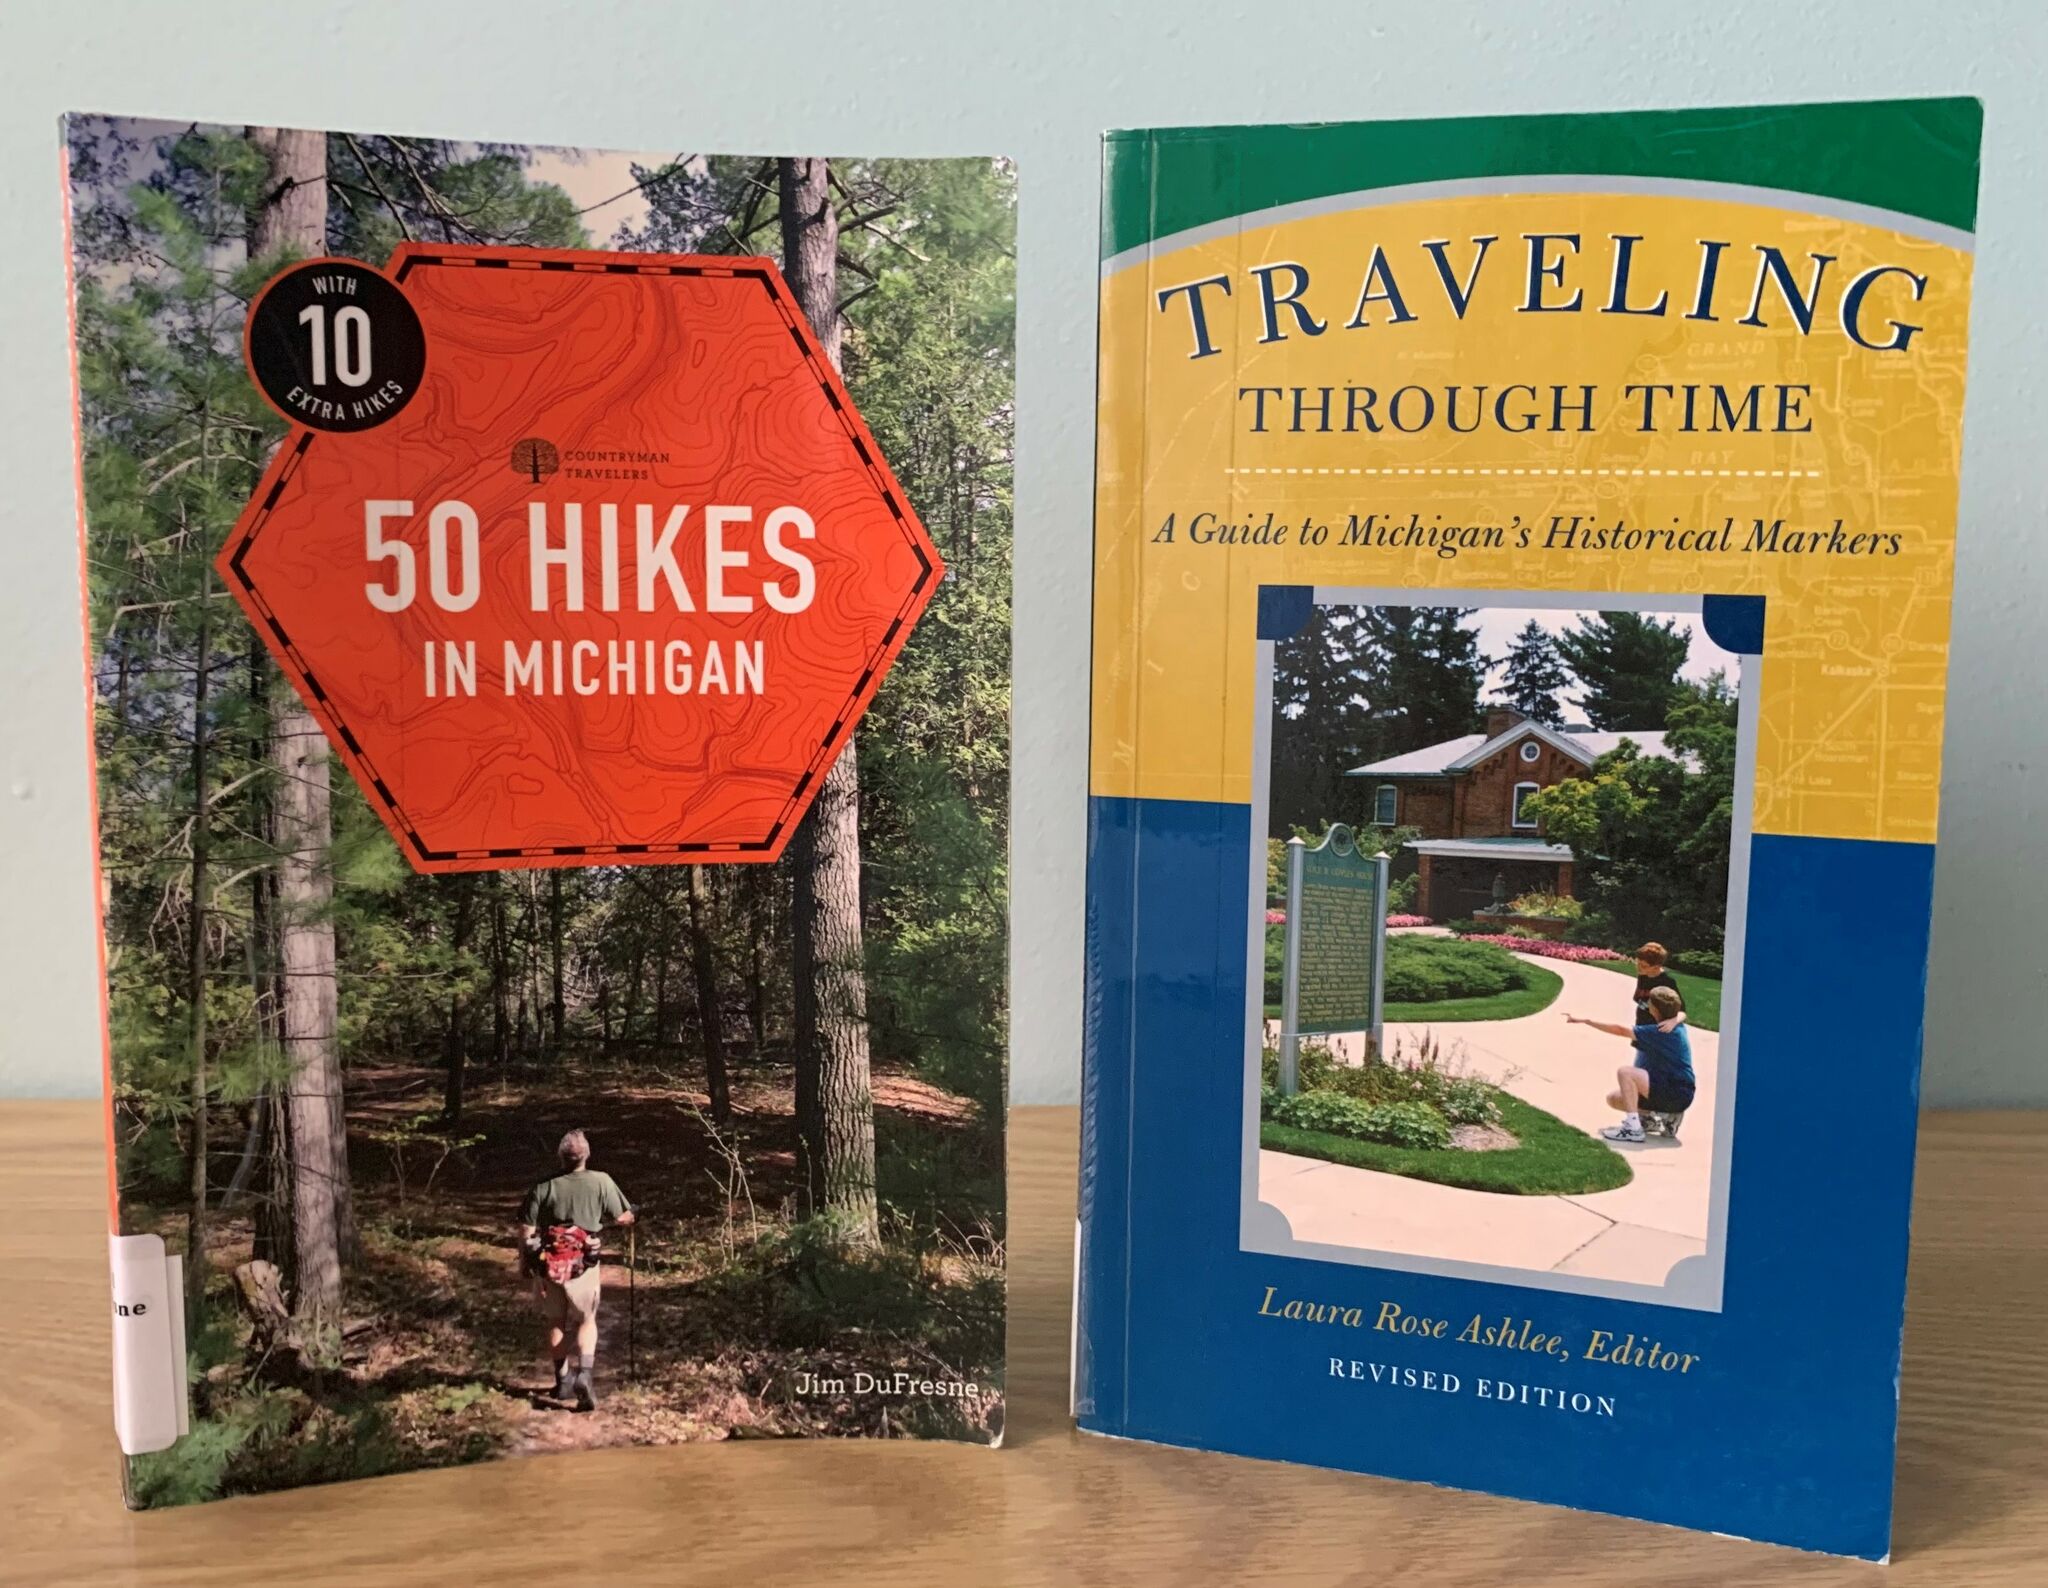 Manistee County Library staff members share titles on Michigan travel